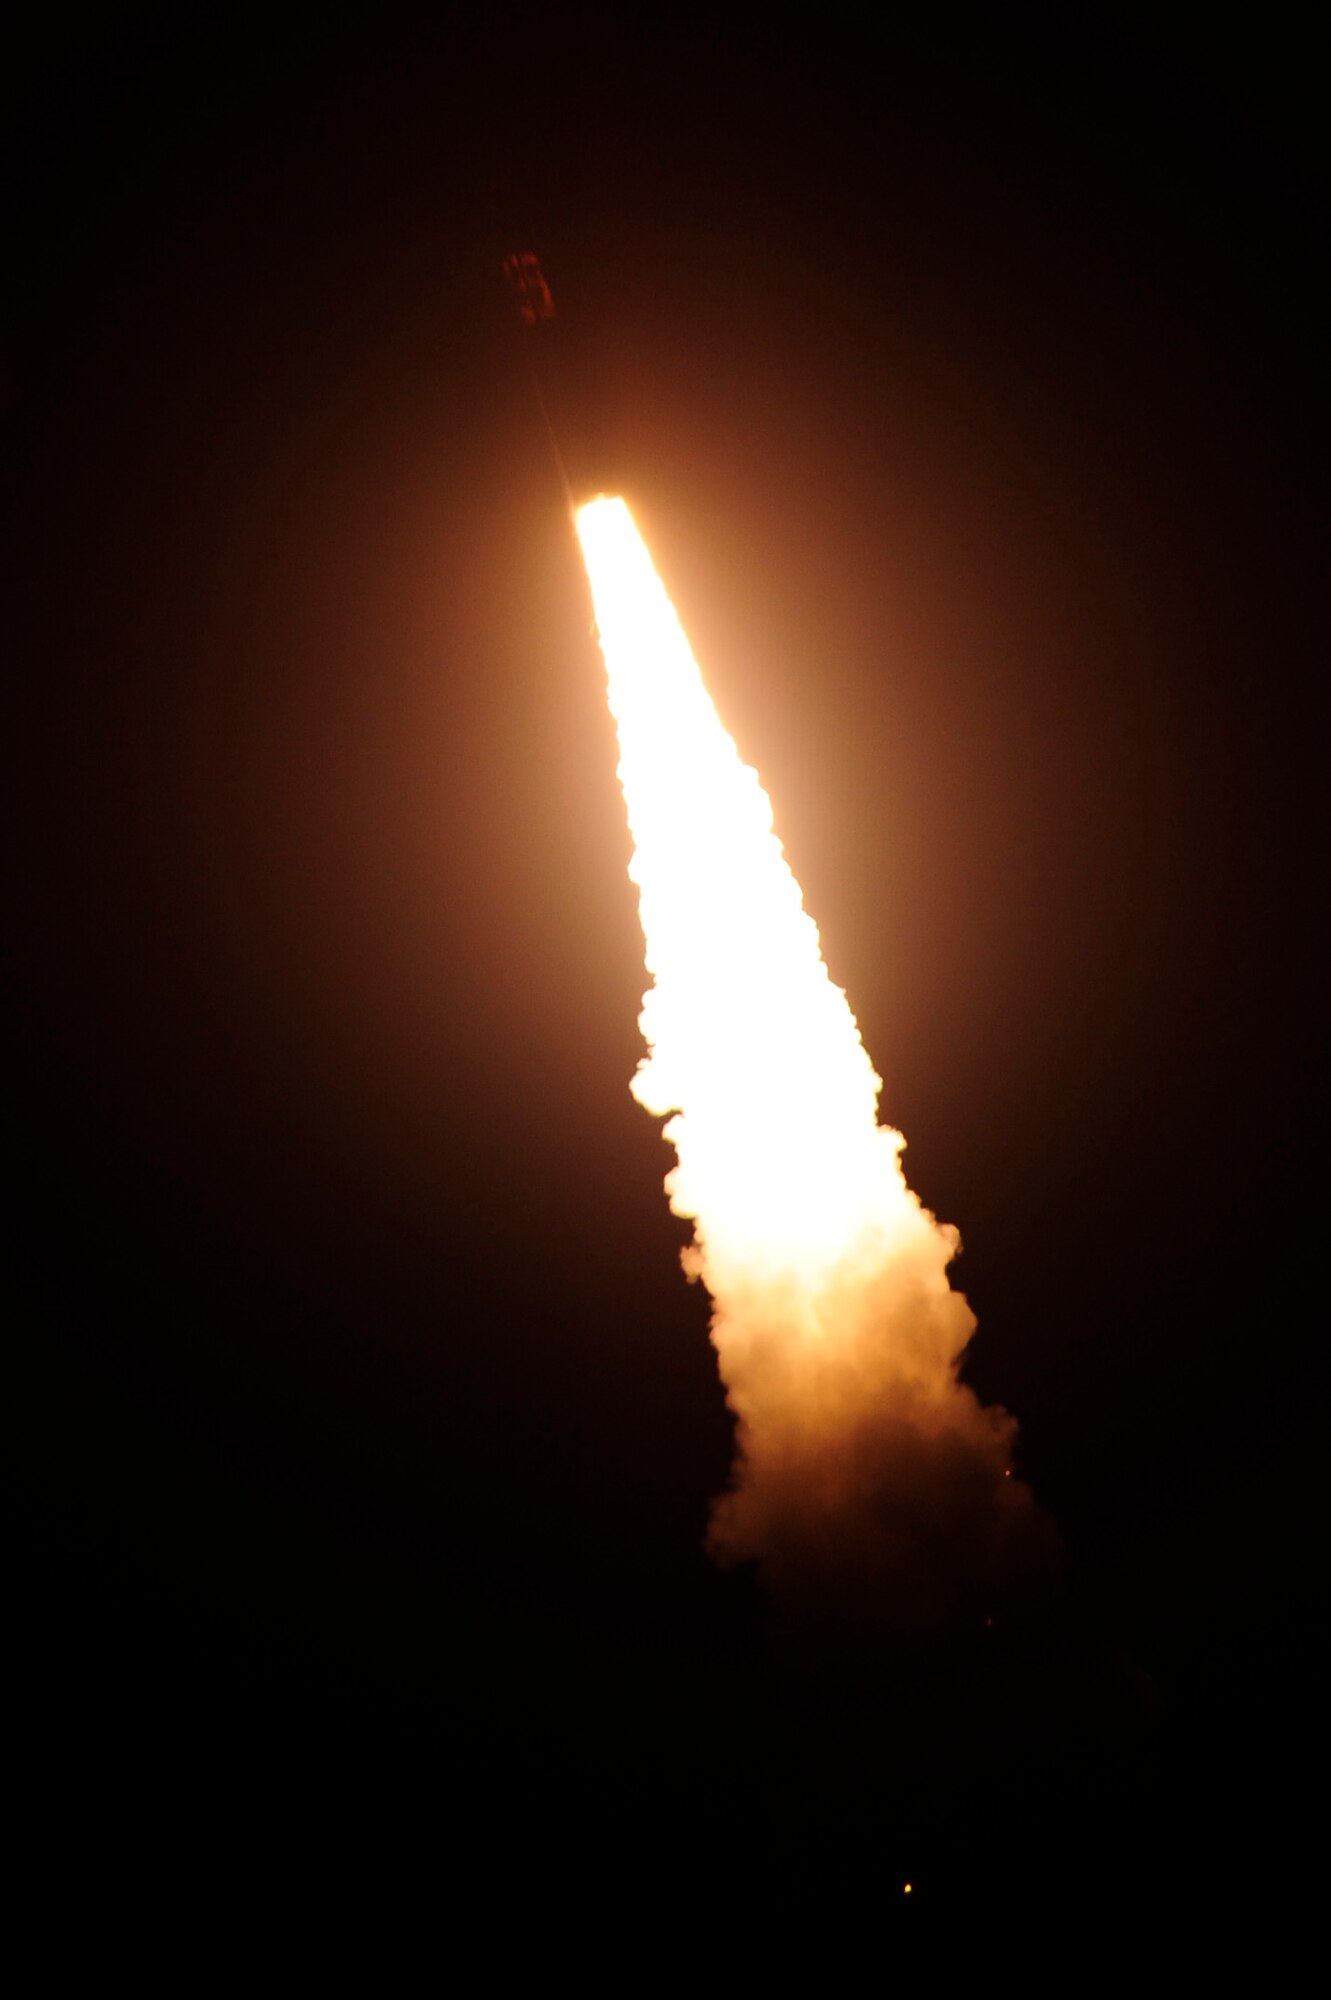 An unarmed Minuteman III intercontinental ballistic missile (ICBM) launches at 3:53 a.m. Pacific Daylight Time, March 27, 2015, at Vandenberg Air Force Base, Calif. Air Force Global Strike Command demonstrated the capabilities of their ICBM fleet and crew force with two test launches in less than a week. (U.S. Air Force photo/Staff Sgt. Jim Araos)